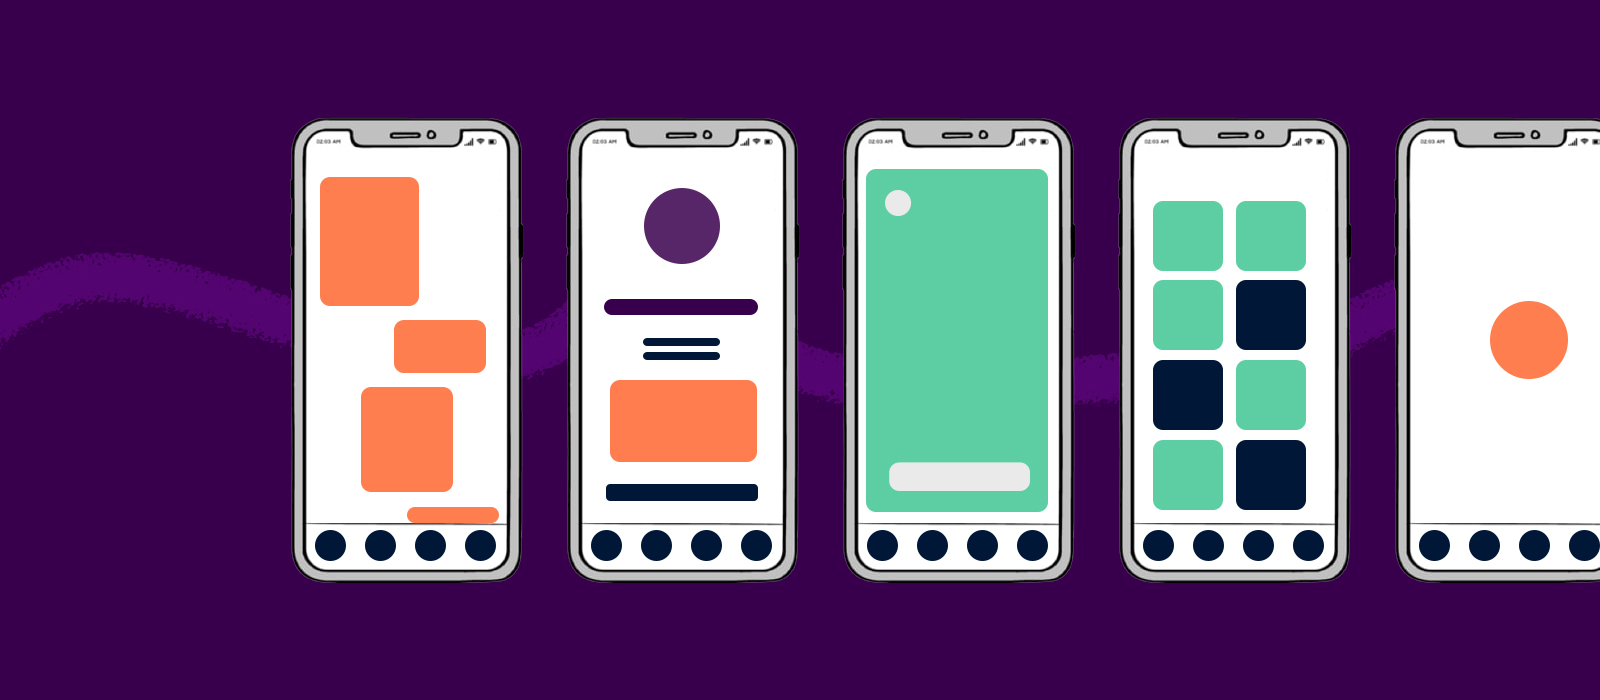 Complete Guide To Creating Mobile App Wireframes Adobe Xd Ideas